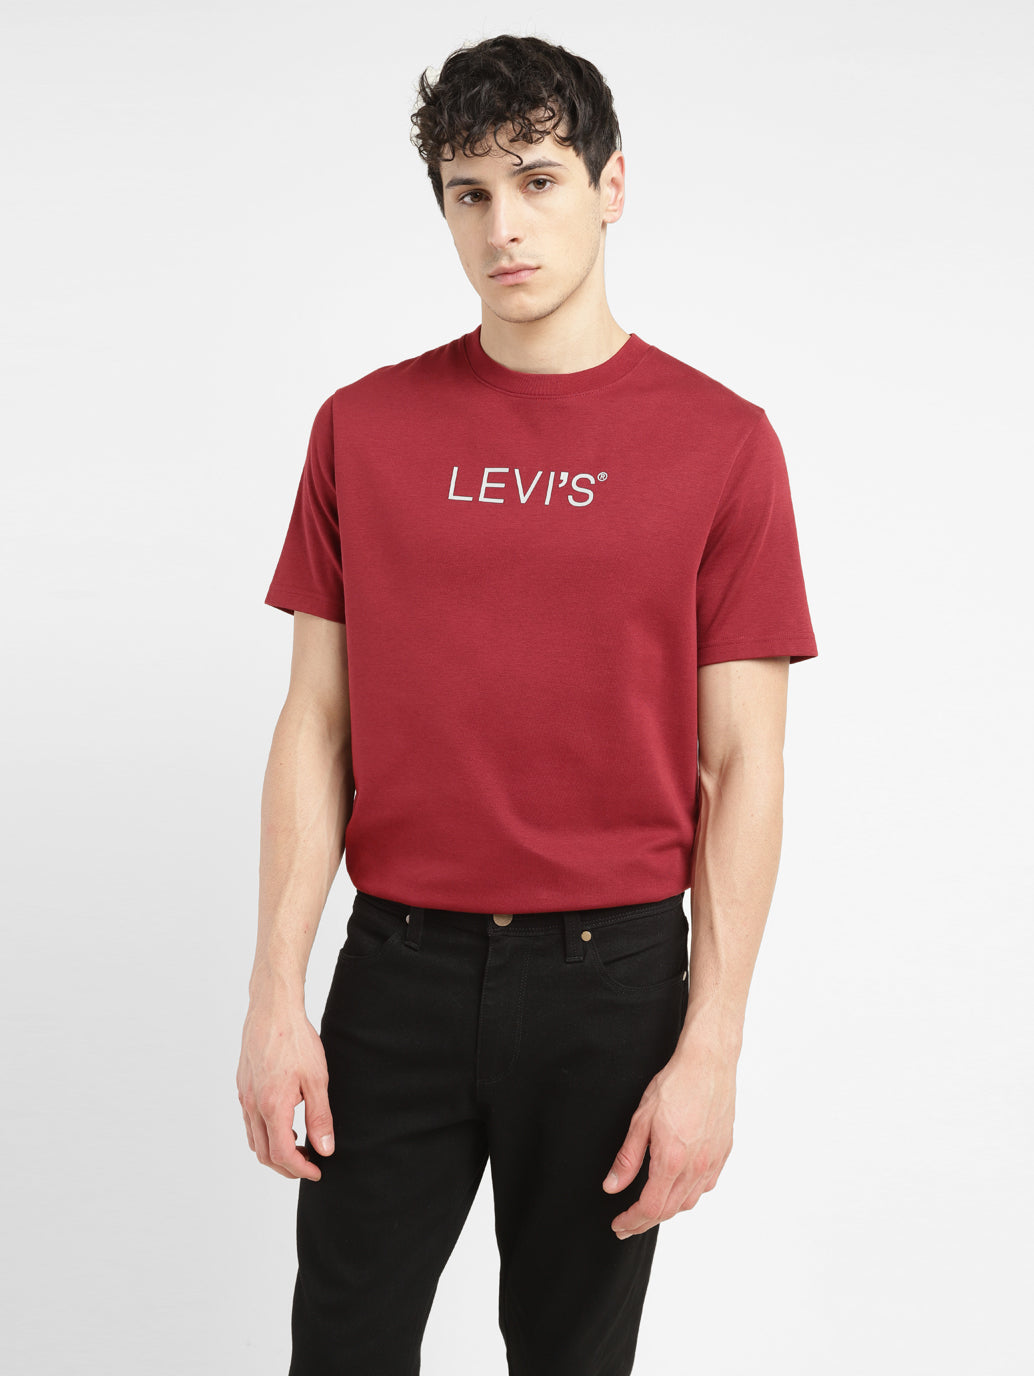 LEVIS ATHL TEE ATH BRANDED 3 SUN DRIED TOMATO A7897-0005 T-SHIRT SHORT SLEEVE (M)